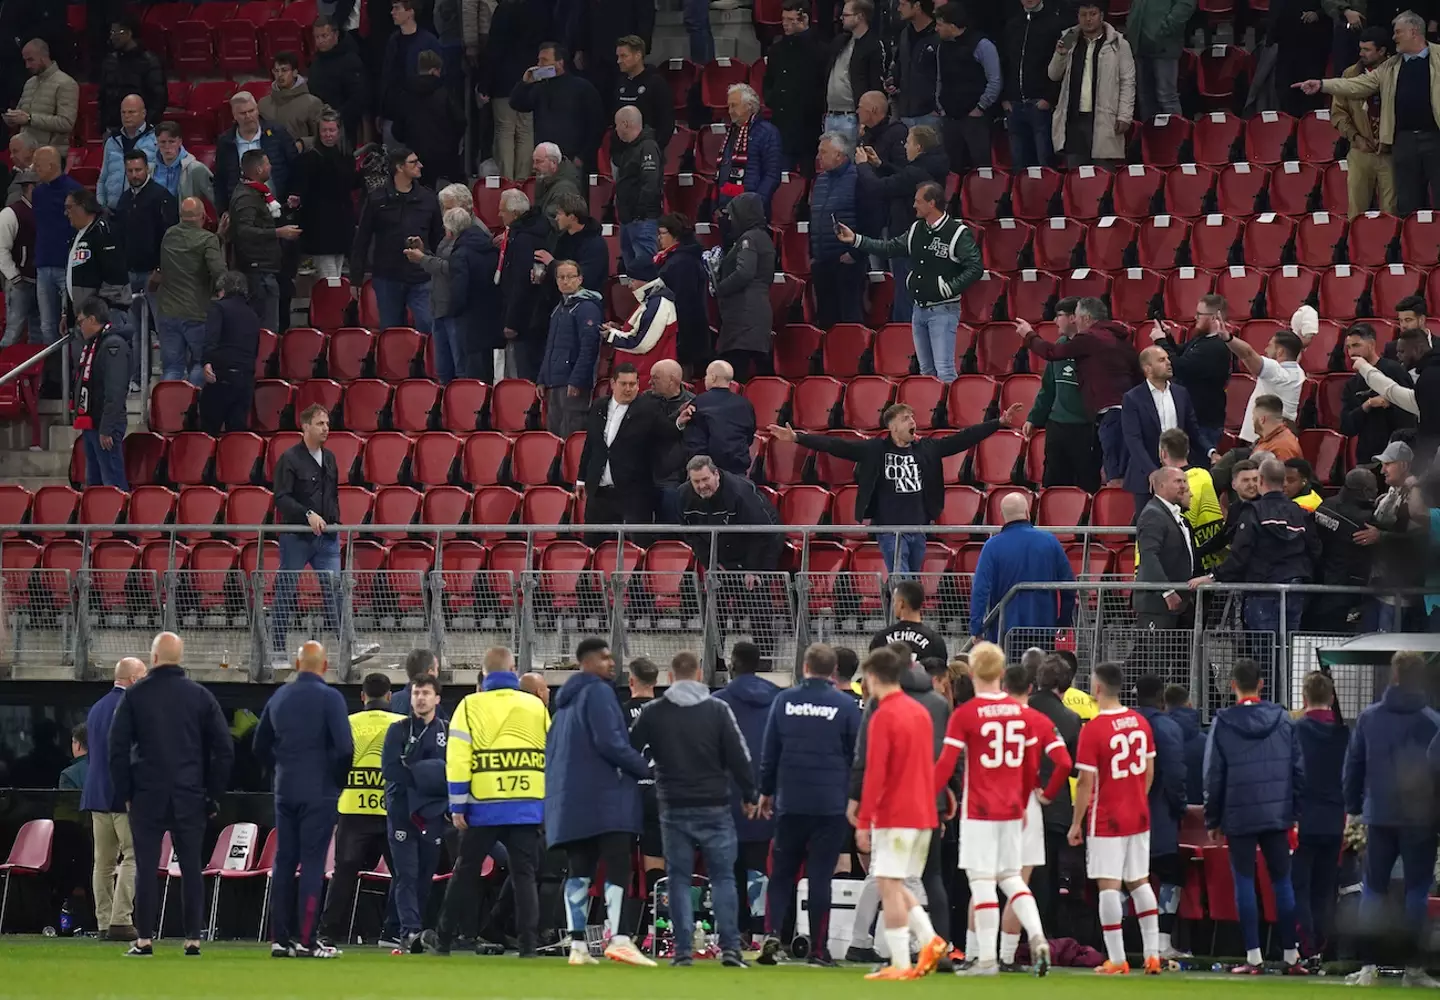 AZ Alkmaar have apologised for the violence.